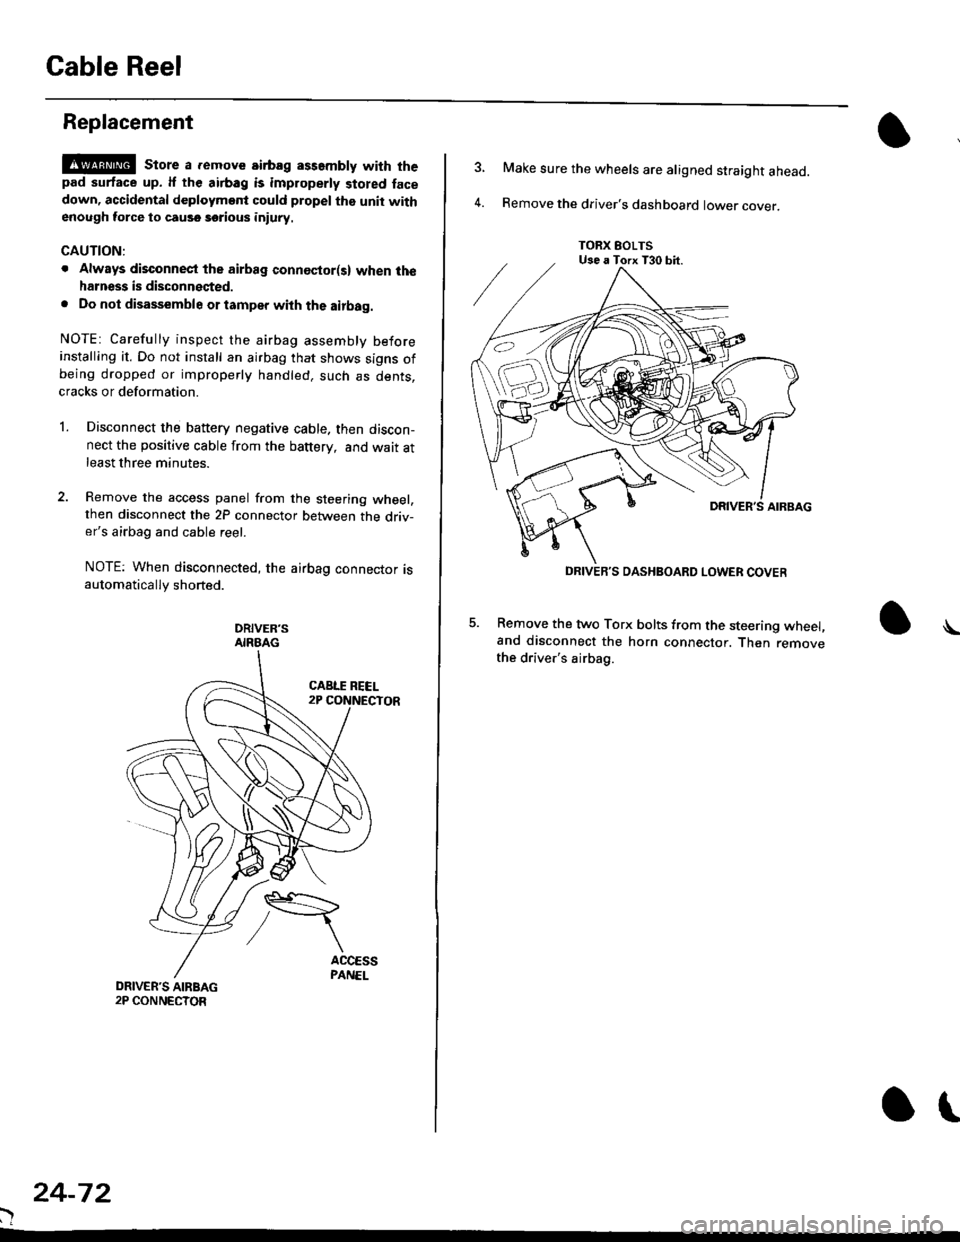 HONDA CIVIC 2000 6.G Owners Guide Gable Reel
Replacement
!@@ store a .emove airbag assambly with thepad surtace up. lf the airbag is improperly stored face
down, accidental deploymont could propel the unit withenough force to cause so